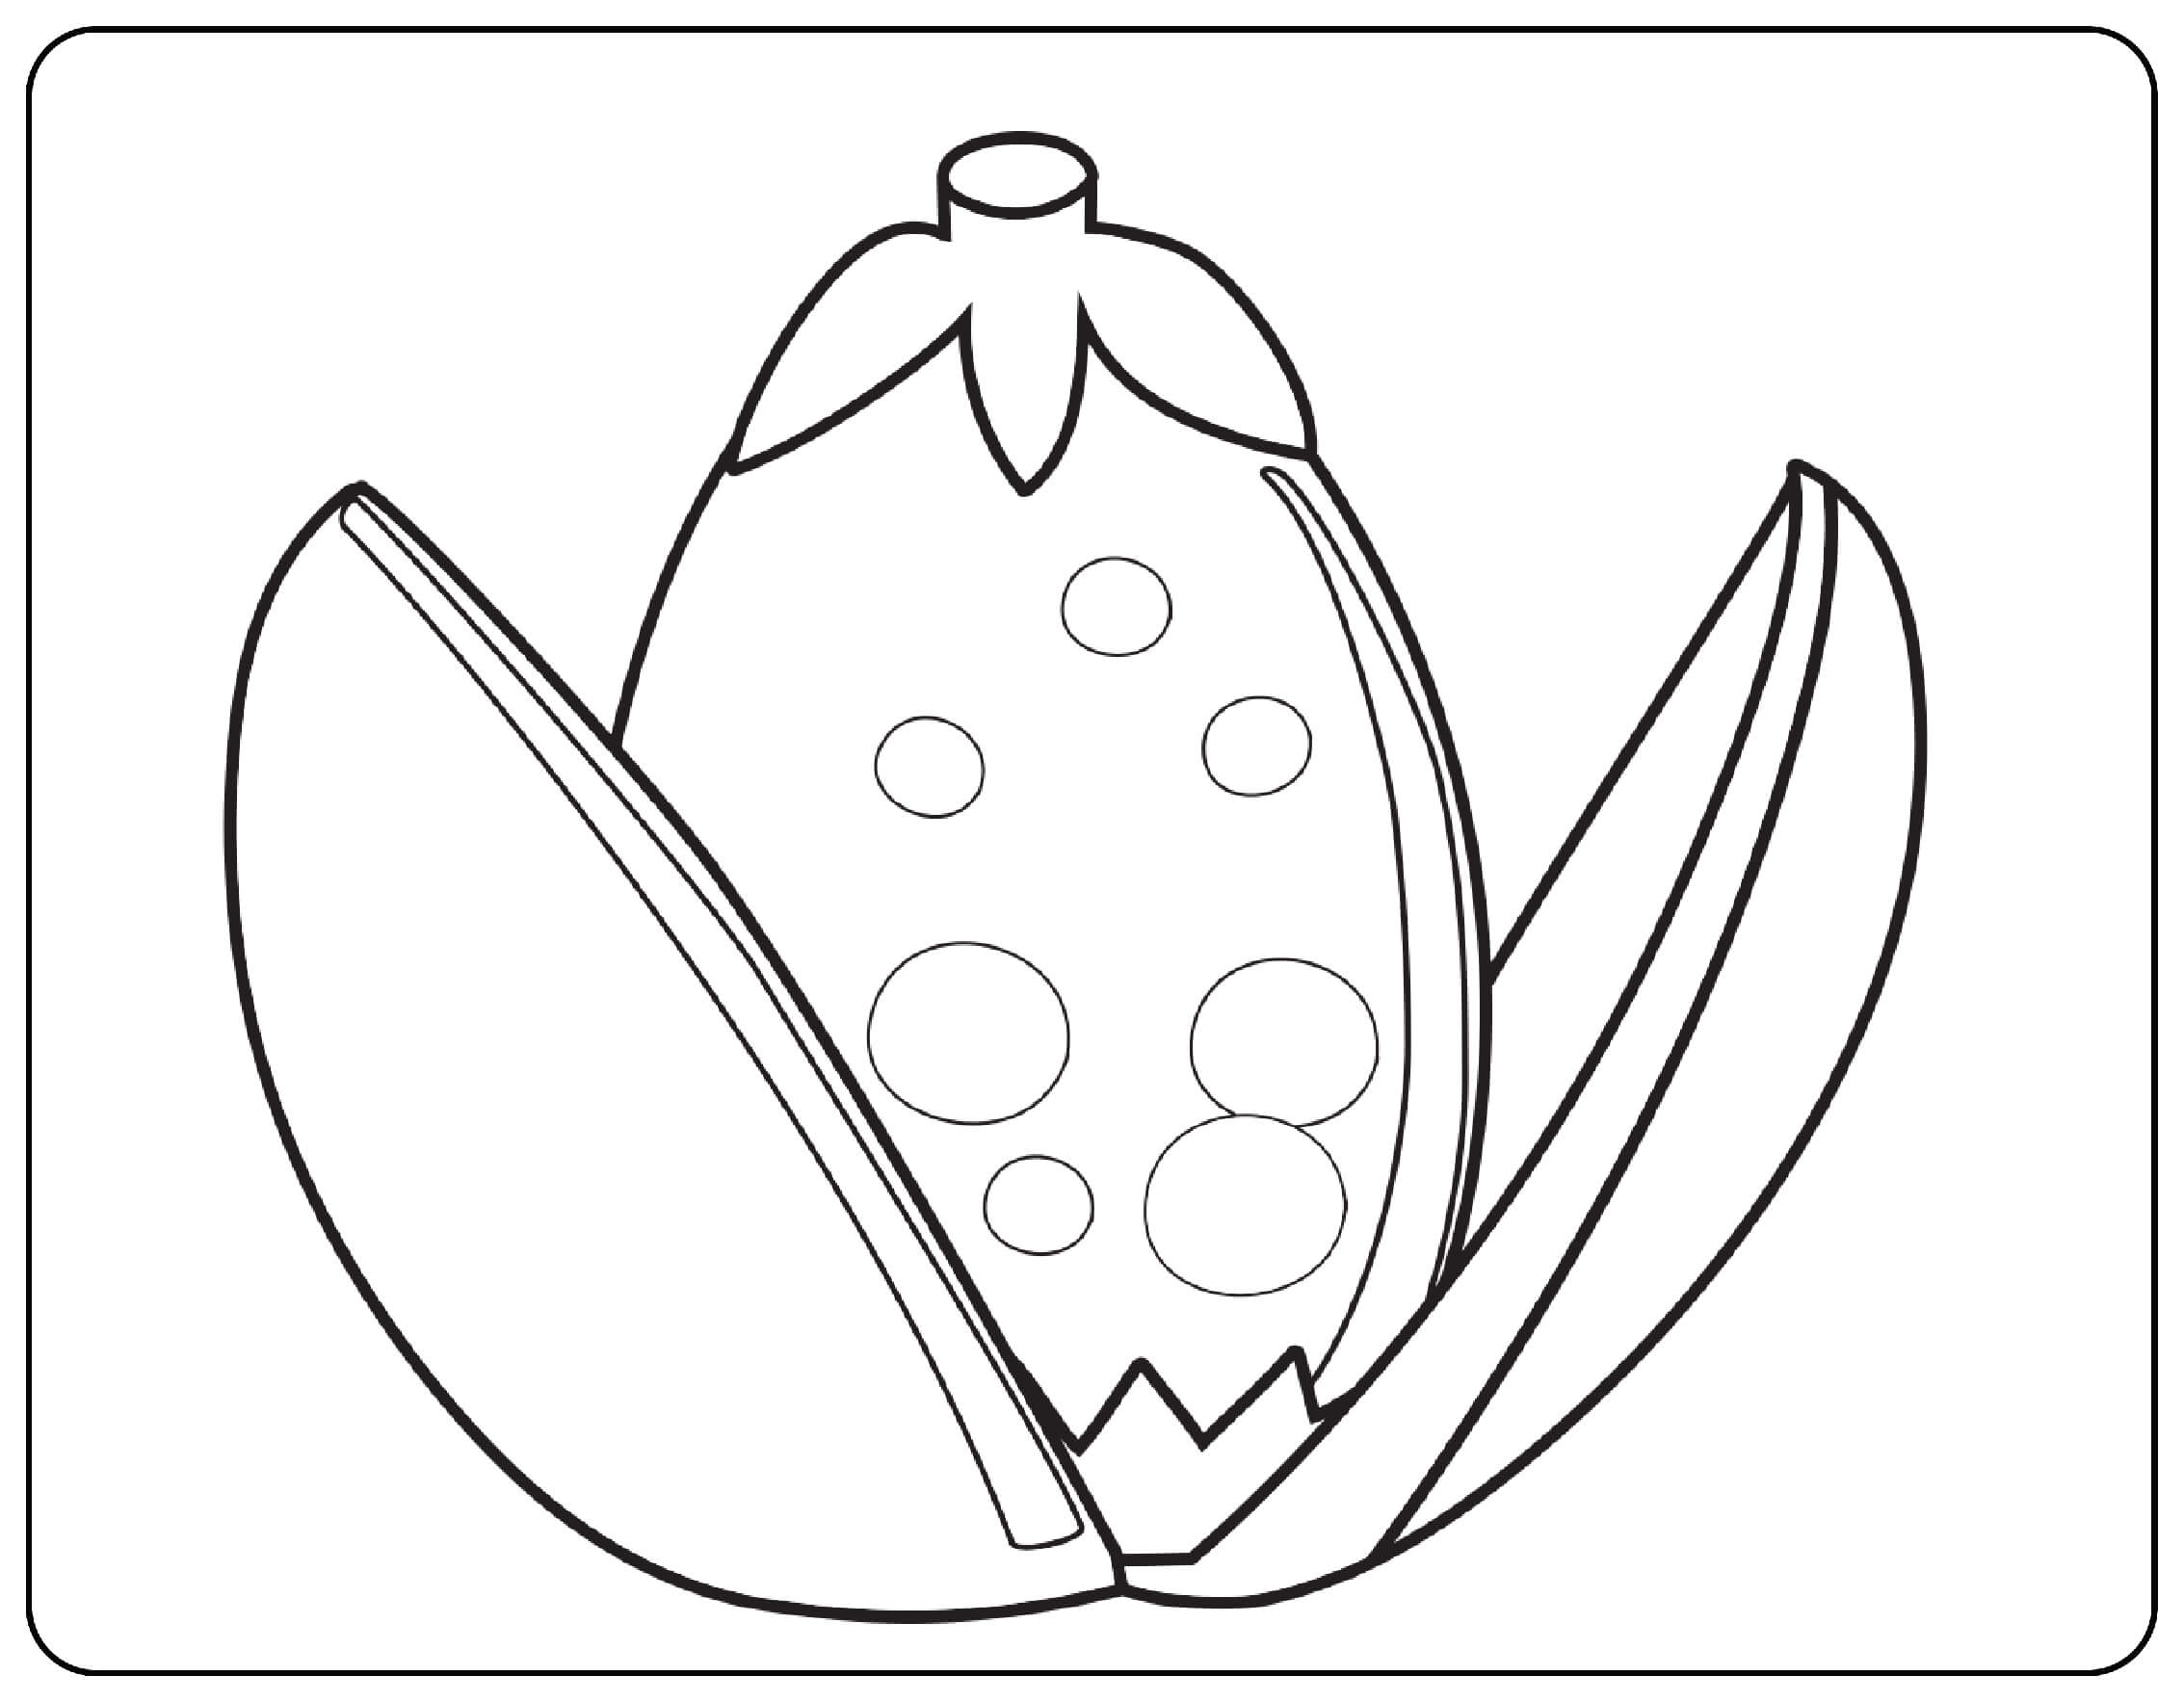 Golden Egg Coloring Page